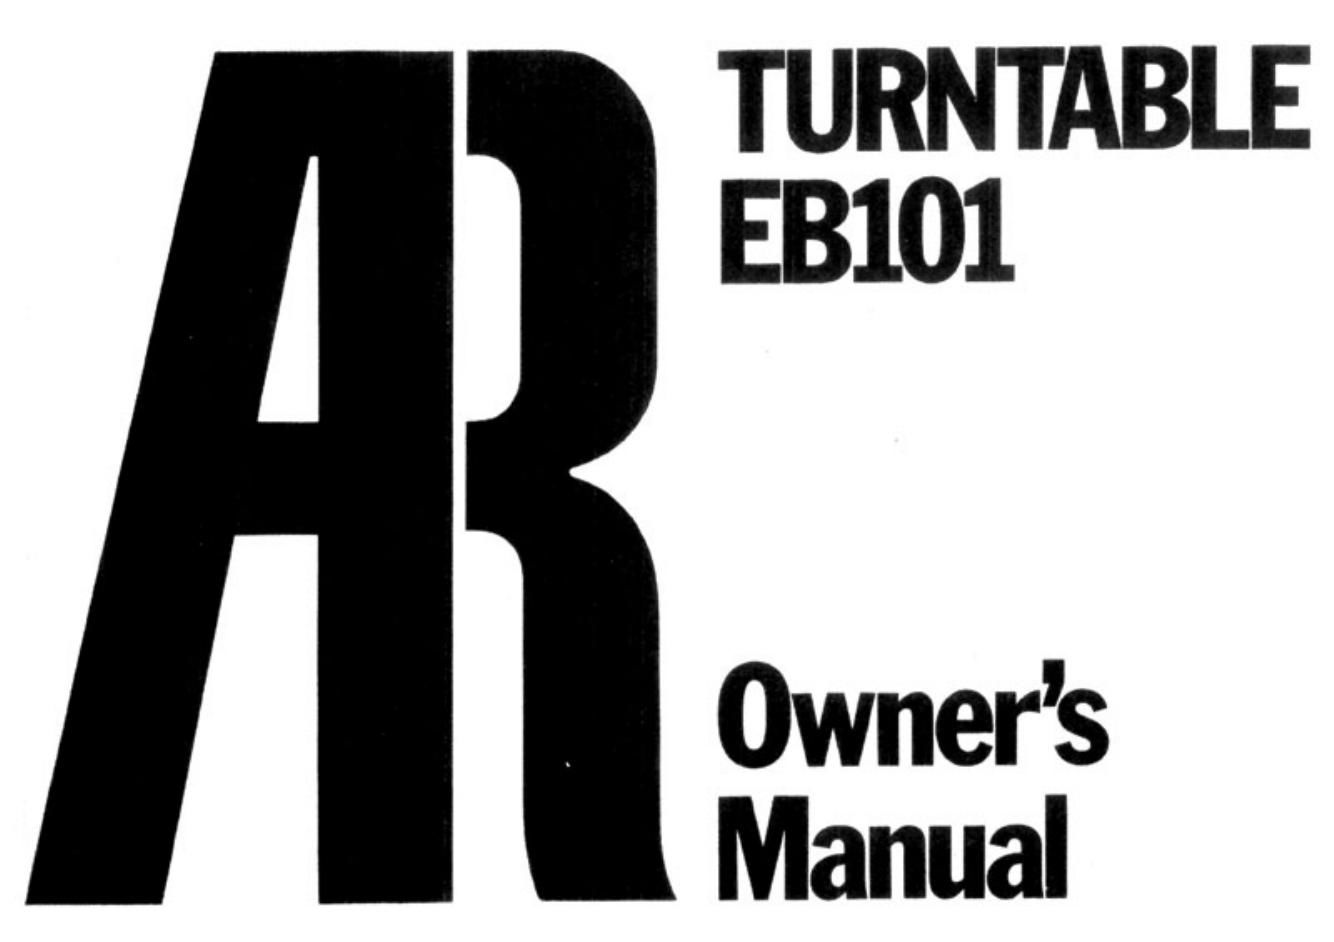 audio research eb 101 owners manual